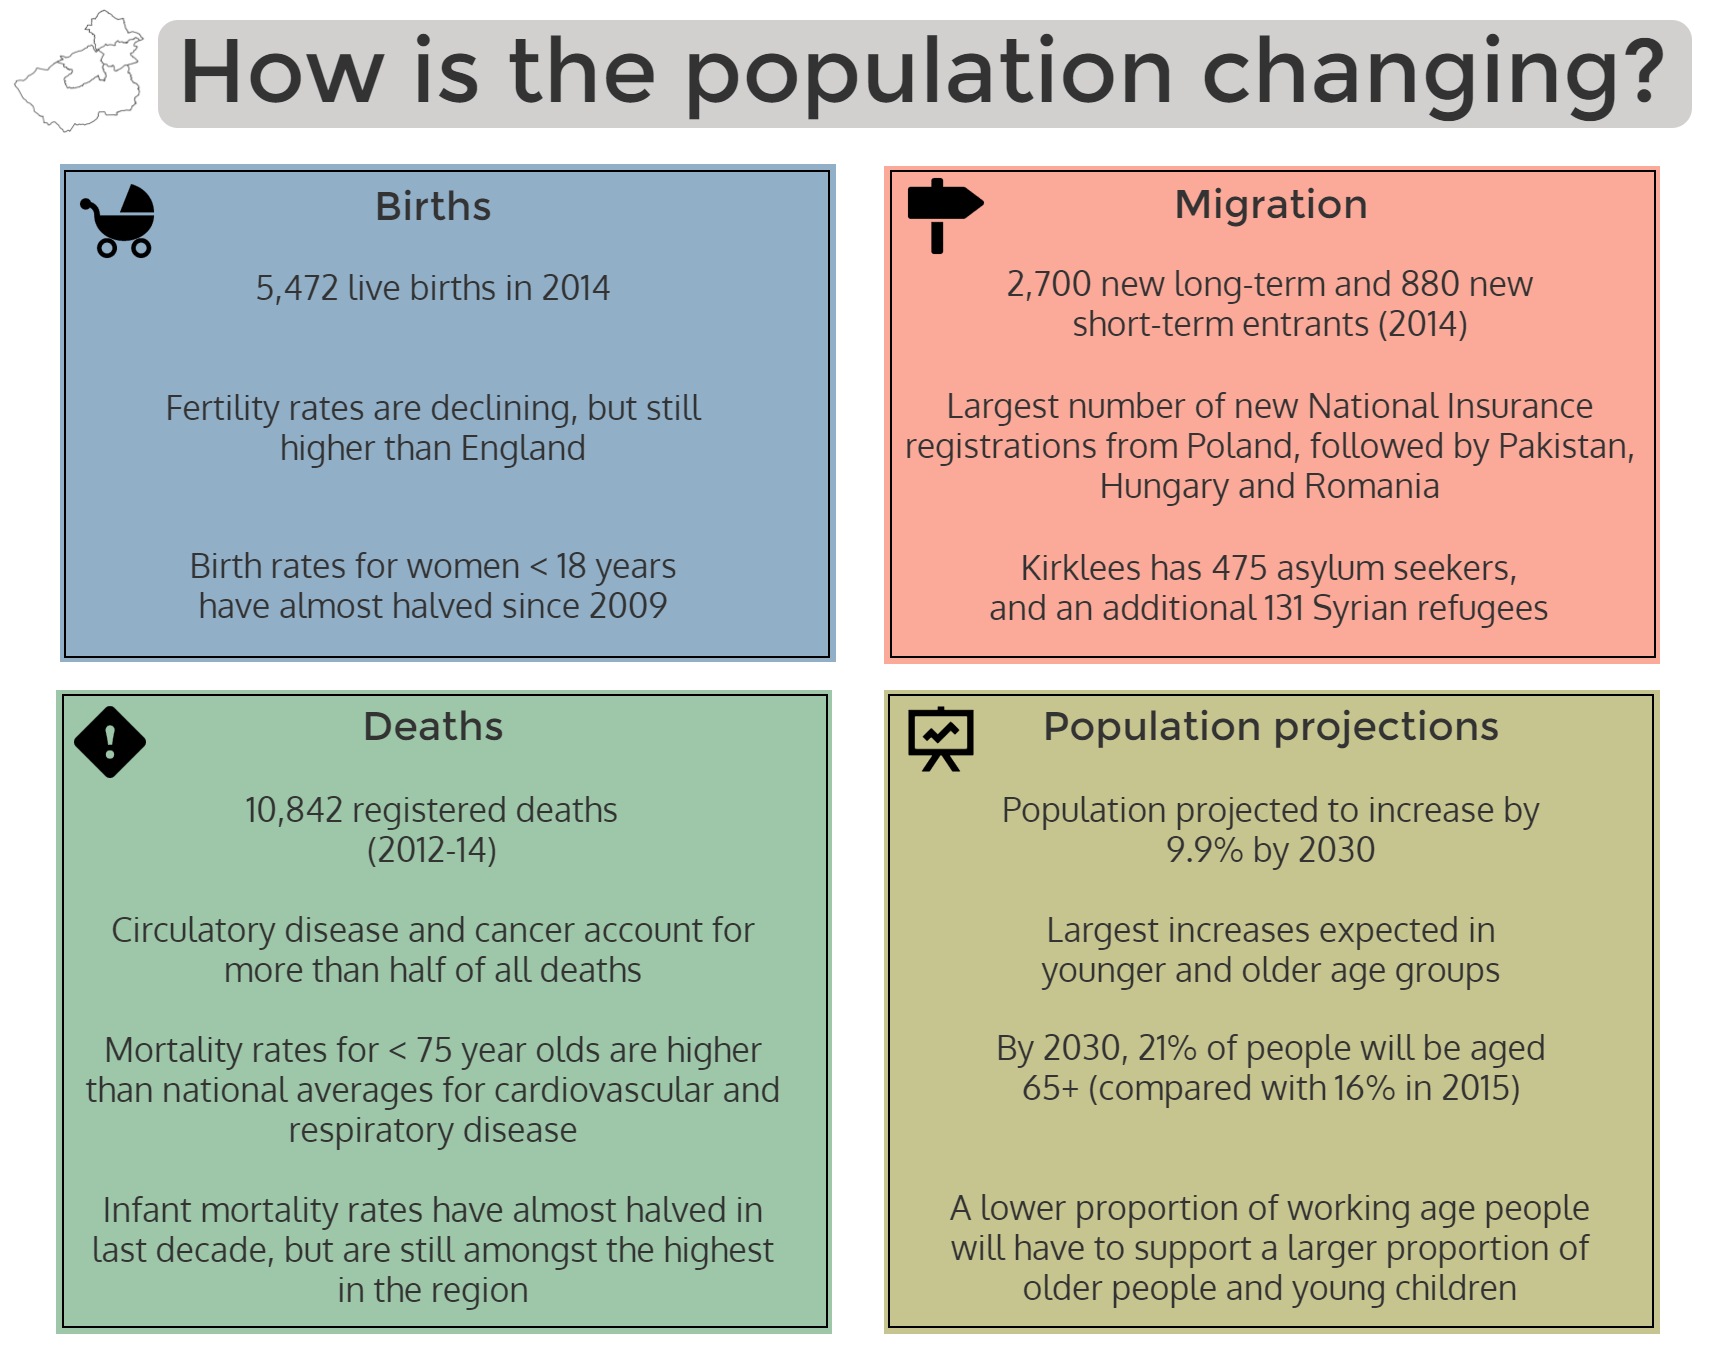 How is the population changing?